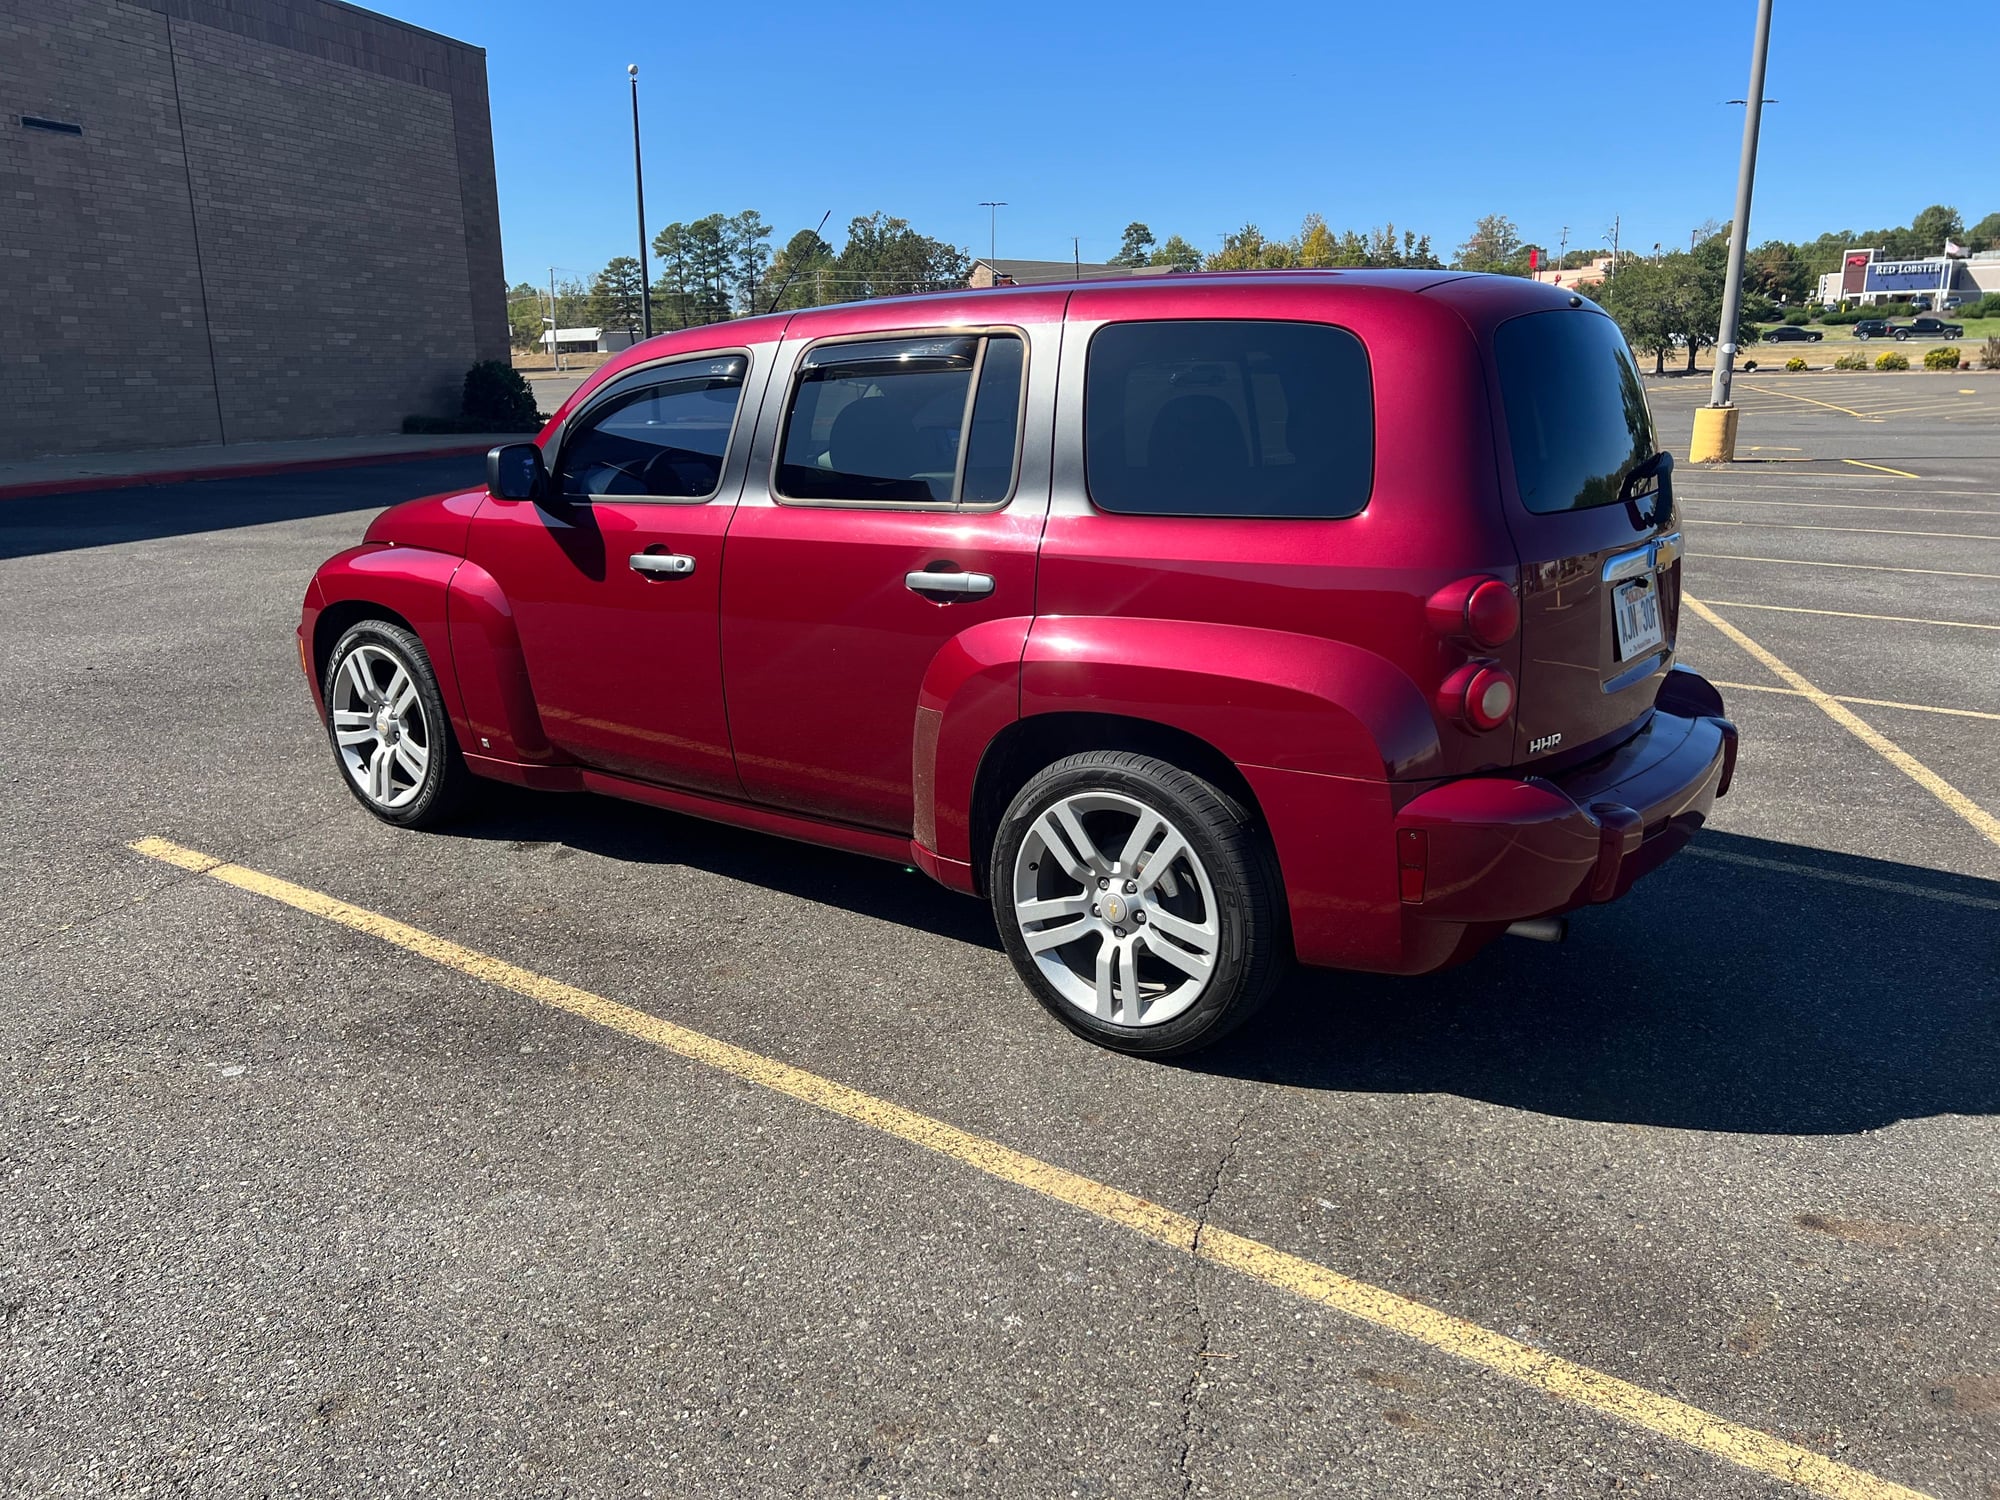 2007 Chevrolet HHR - 2007 HHR LS, low miles, new tires with SS wheels - Used - VIN 3gnda13d47s617348 - 56,000 Miles - 4 cyl - 2WD - Automatic - Wagon - Red - Hot Springs, AR 71913, United States